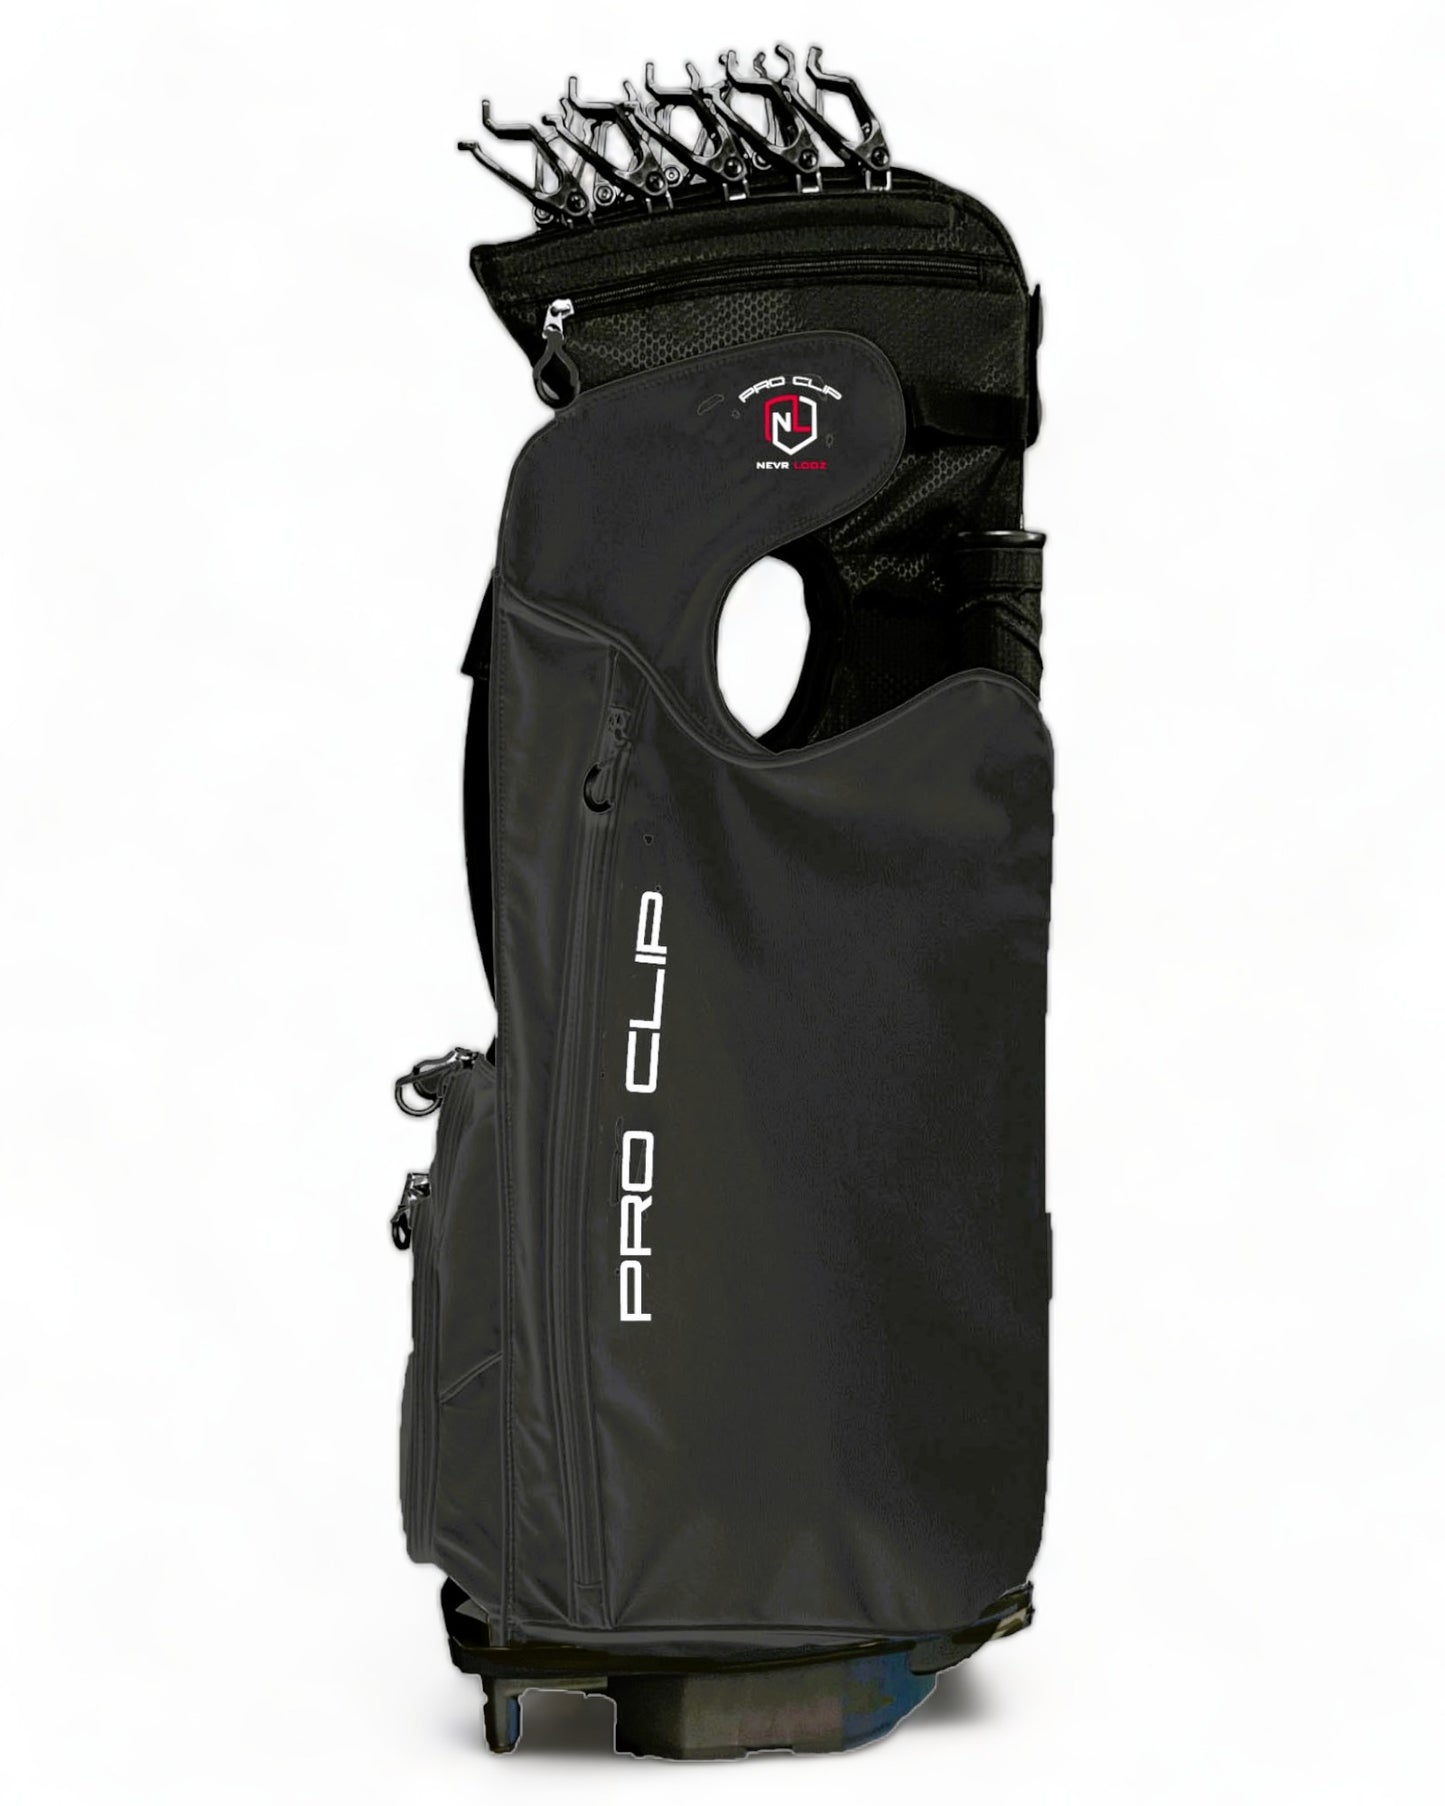 A NEVR LOOZ PRO CLIP C1 black buttery PU leather EXOSKIN golf bag with red and black logo, featuring 12 pockets, 2 putter tubes, D-ring holders, padded strap, and rain hood.